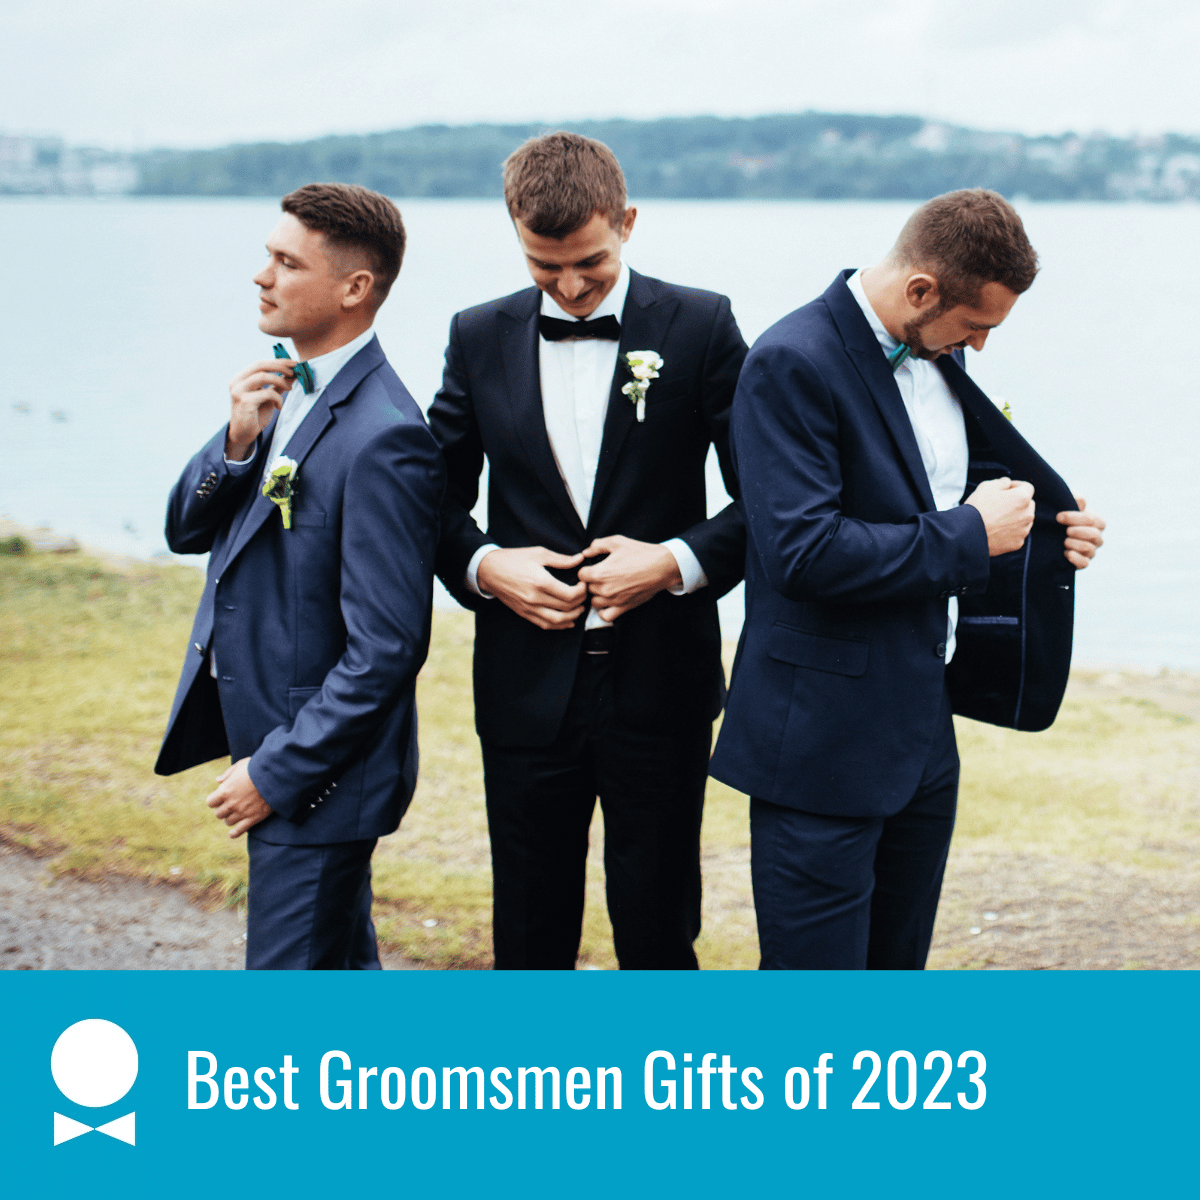 best groomsmen gifts of 2023 feature image